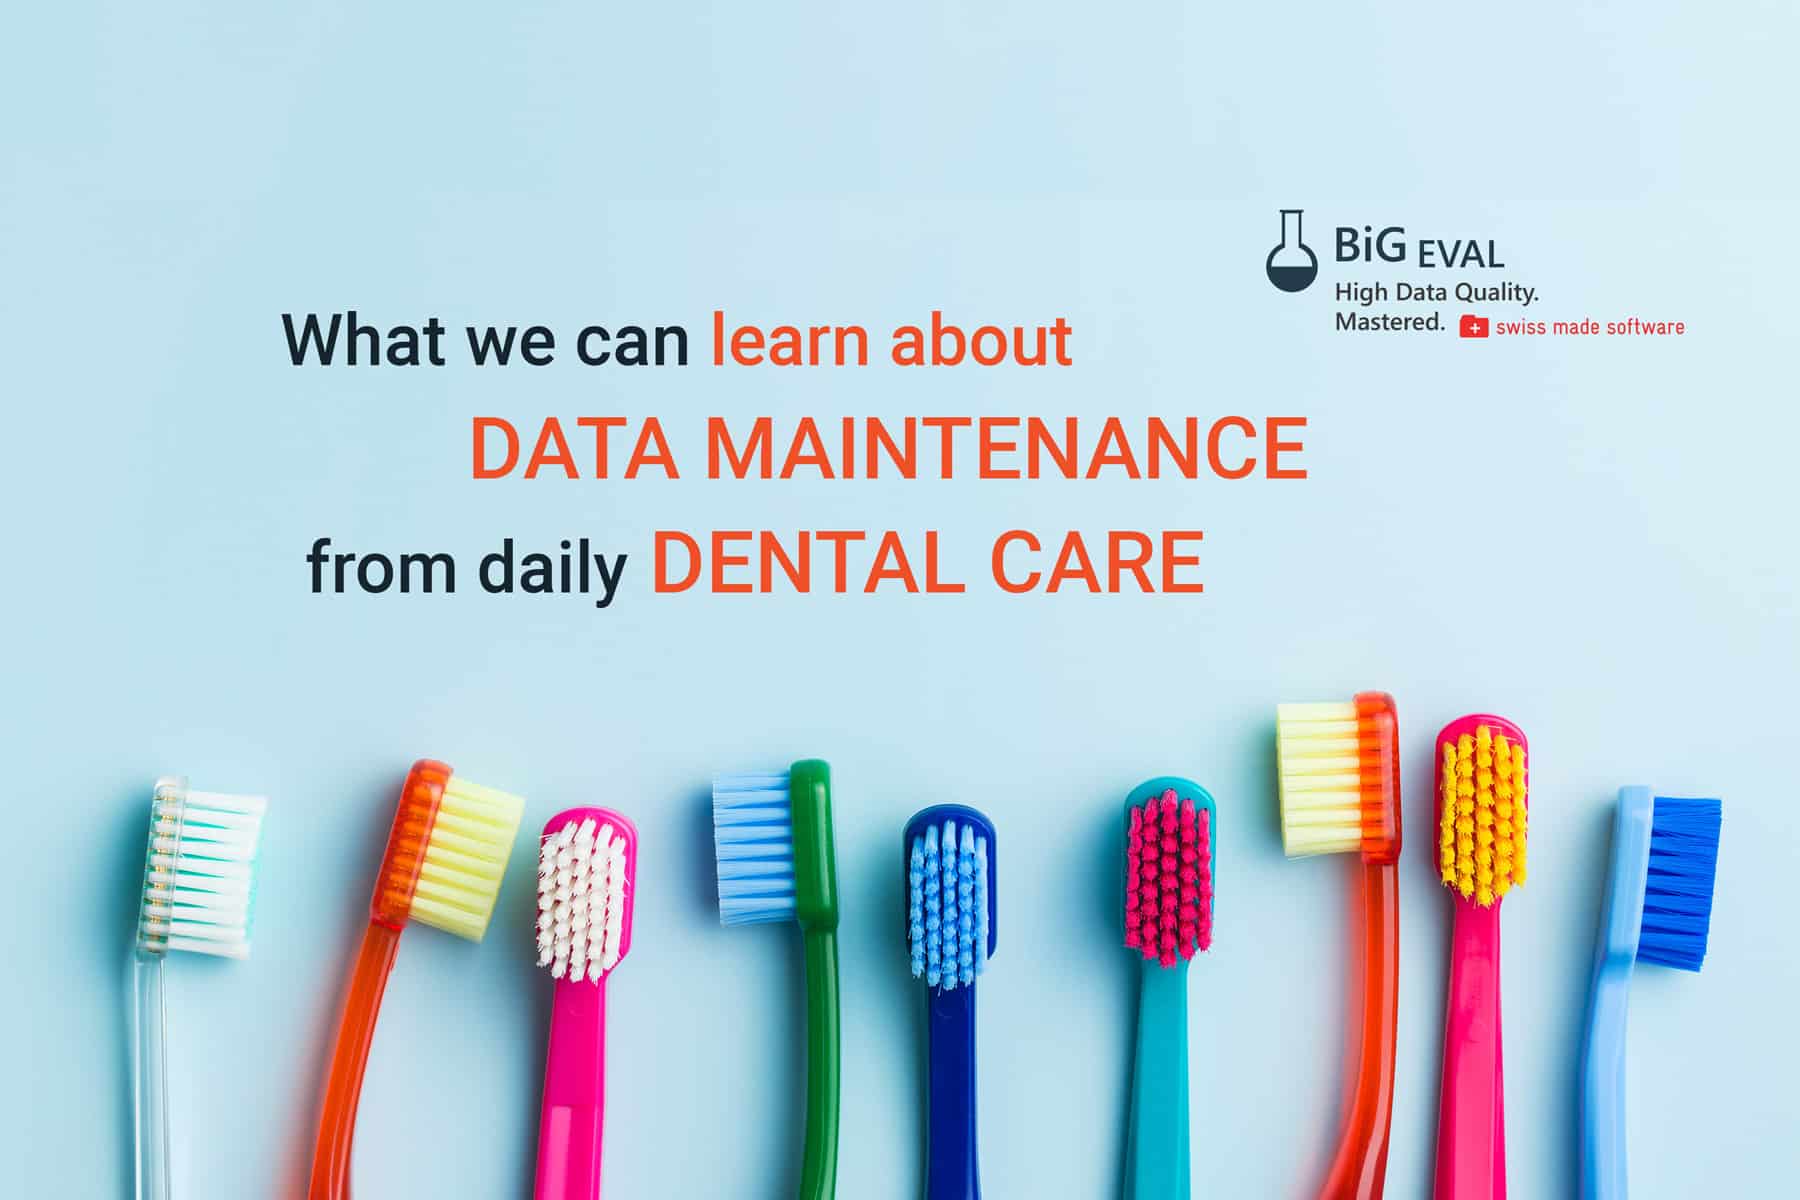 What we can learn about data maintenance from daily dental care?